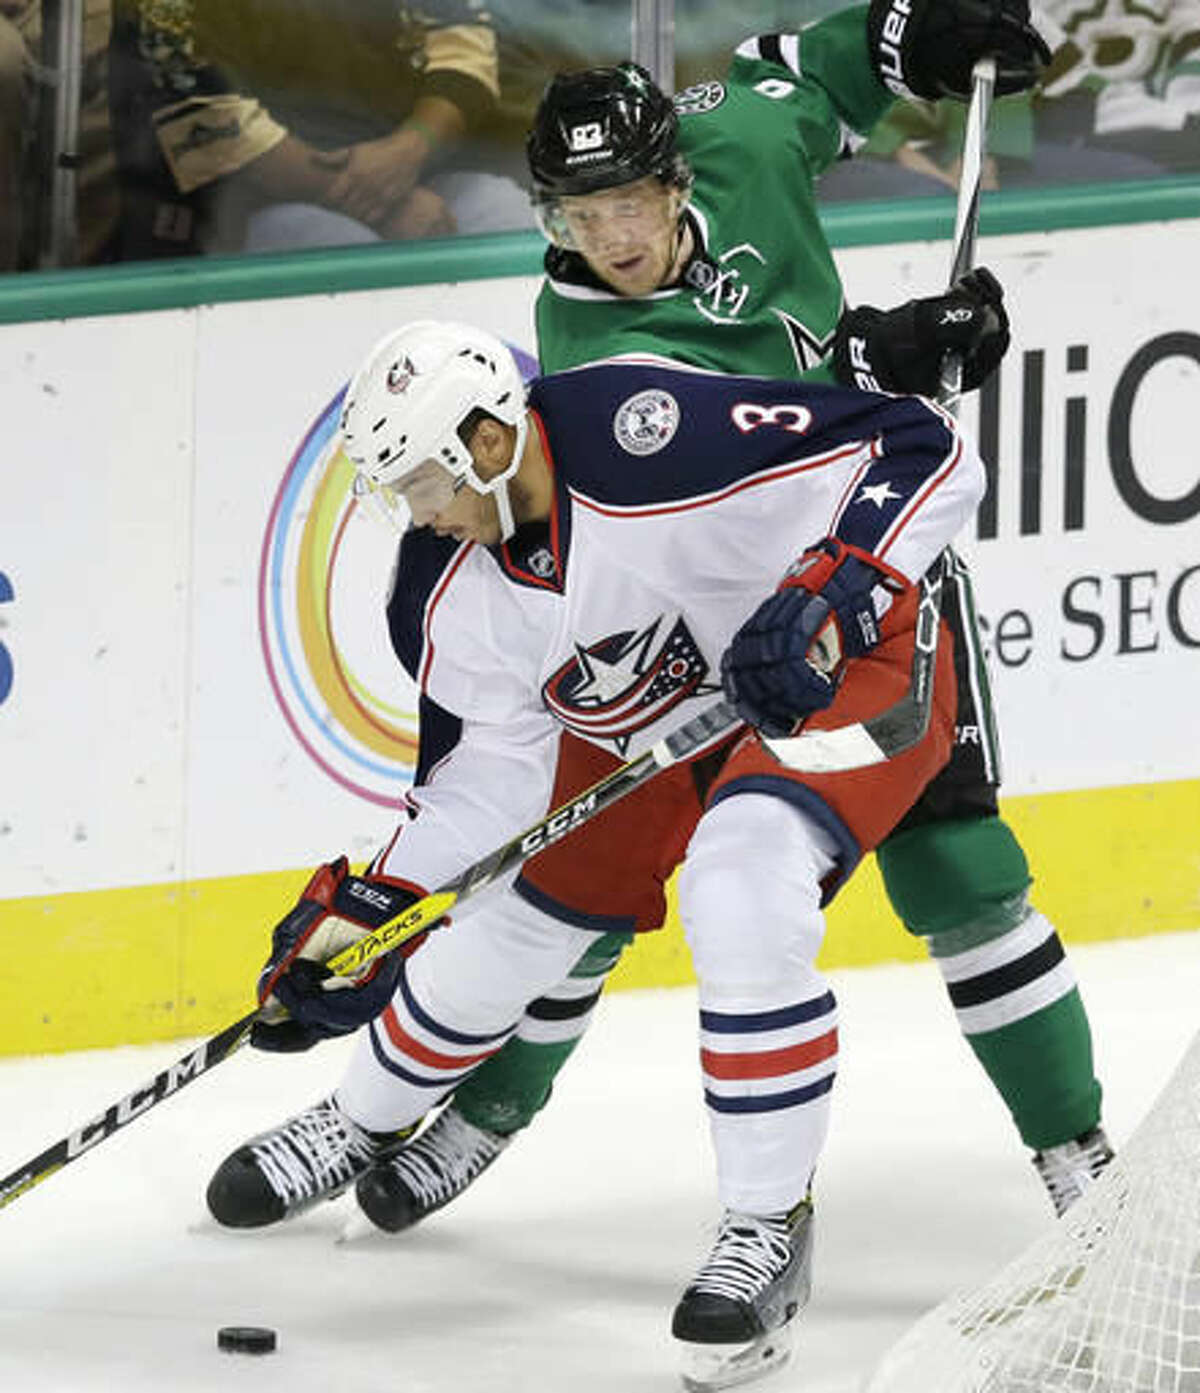 Columbus Blue Jackets defenseman Seth Jones (3) and Dallas Stars right wing Ales Hemsky (83) skate for the puck during the first period of an NHL hockey game Saturday, Oct. 22, 2016, in Dallas. (AP Photo/LM Otero)